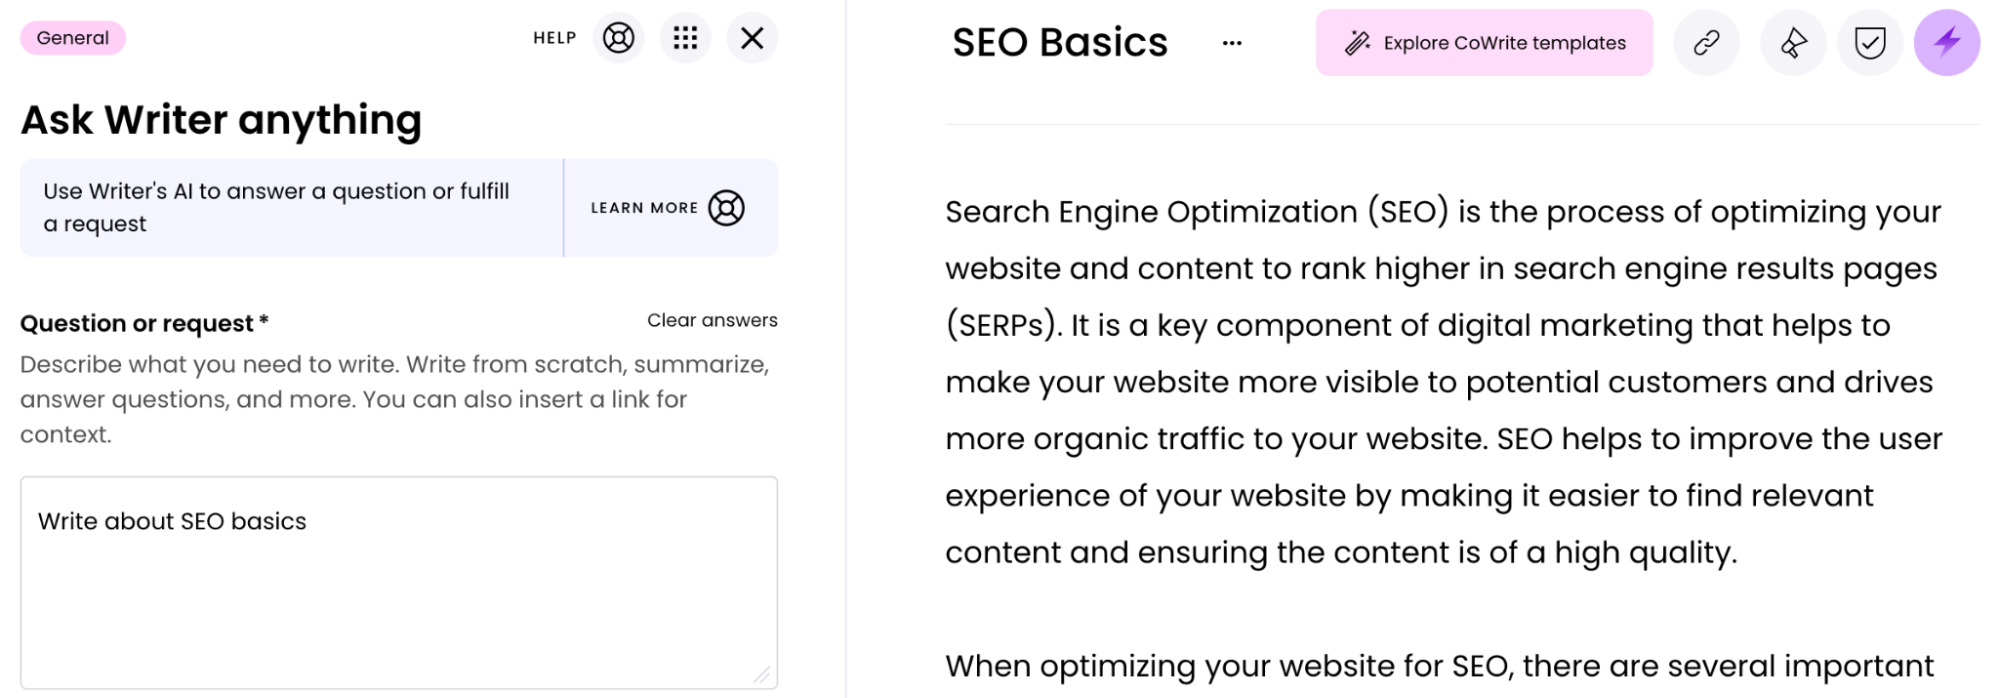 Asking Writer to generate a write-up about SEO basics